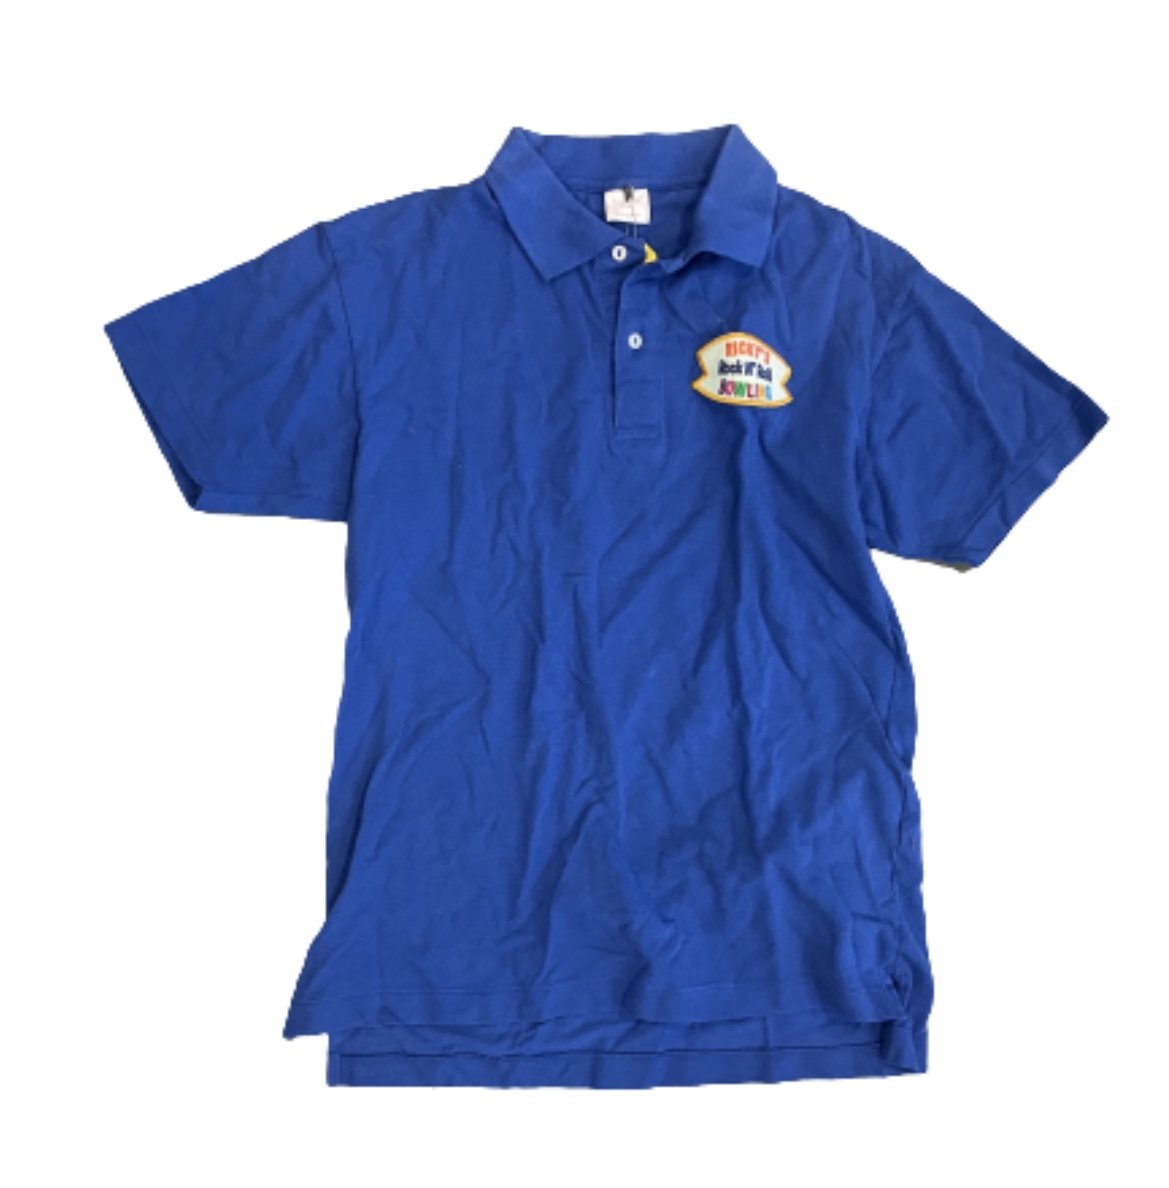 PARKS AND RECREATION: Leslie's Ricky's Rock N' Roll Bowling Alley Shirt